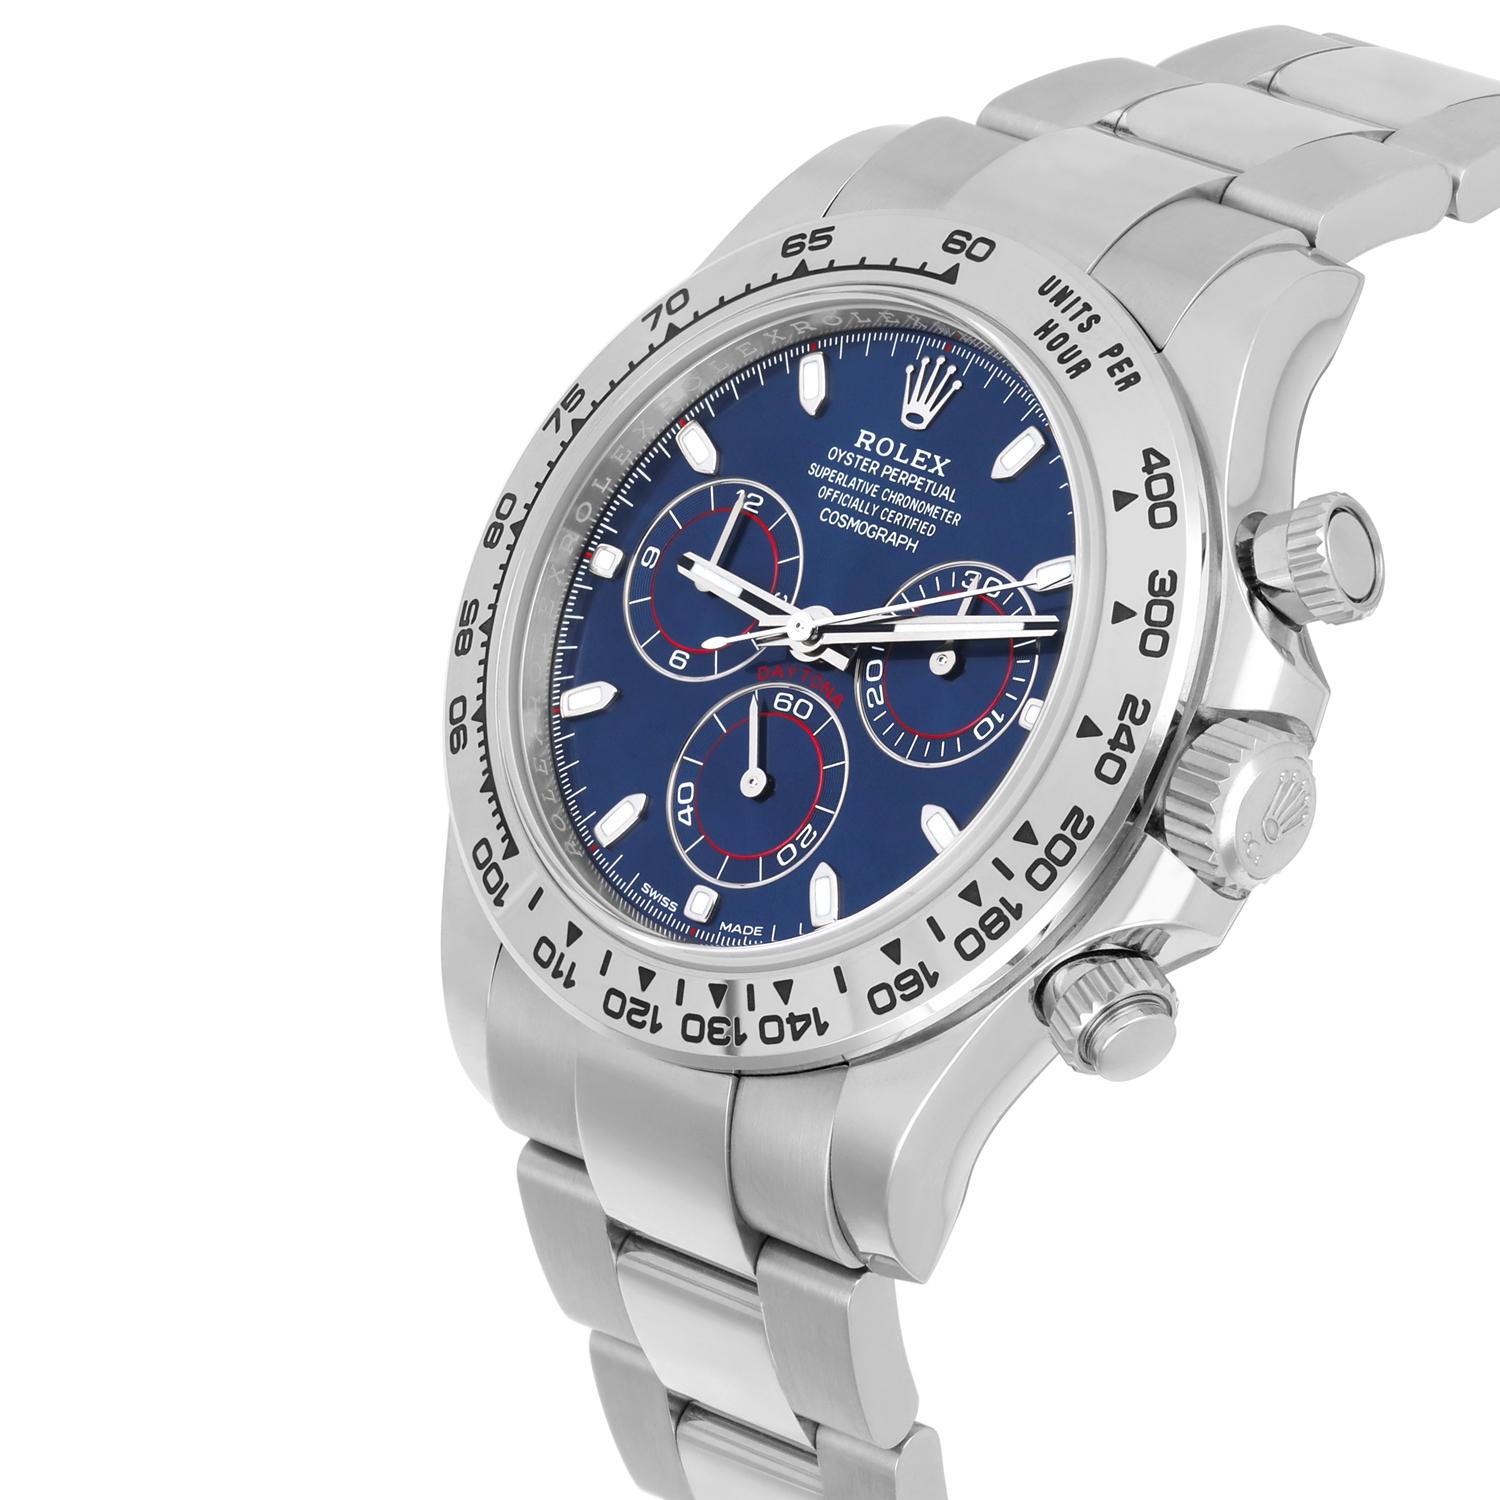 Modern Rolex Cosmograph Daytona White Gold 40mm Blue Dial 116509 Complete 2020 For Sale